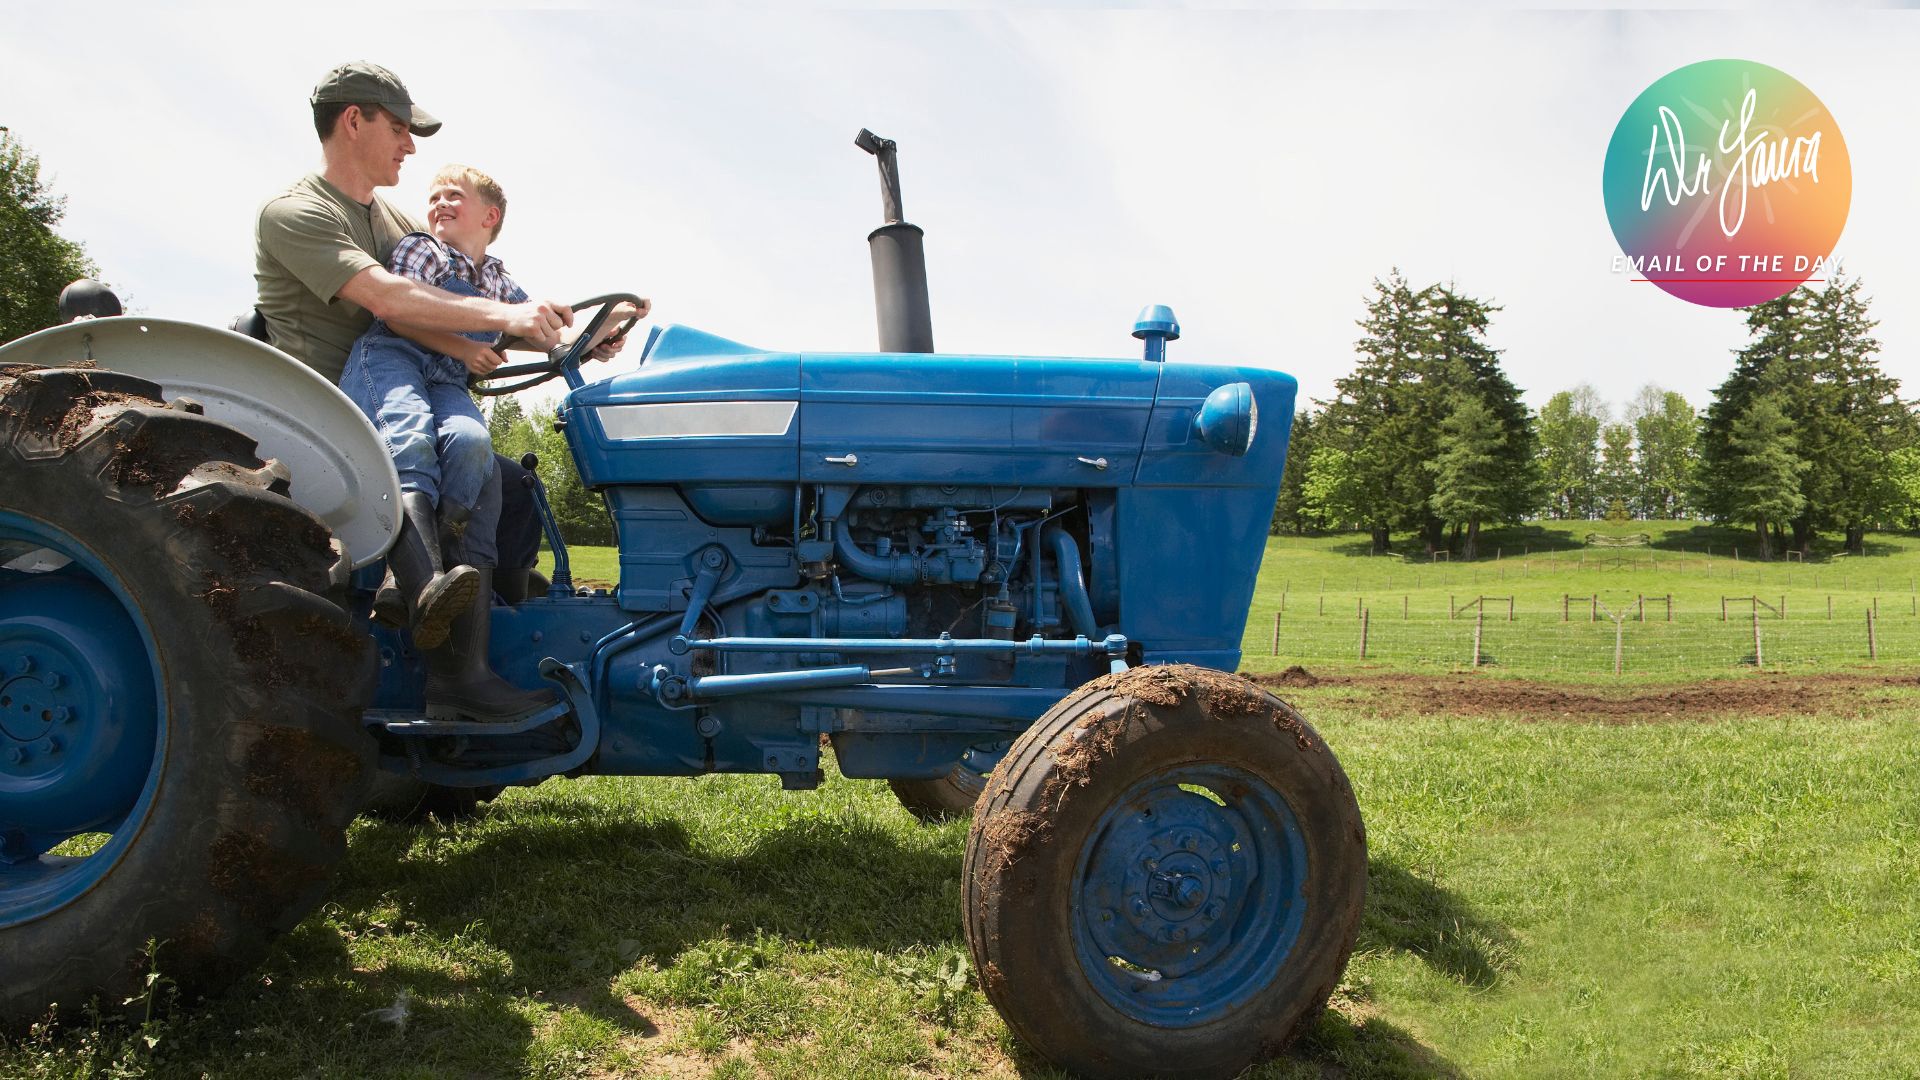 Man and boy sit on blue tractor while riding in the field